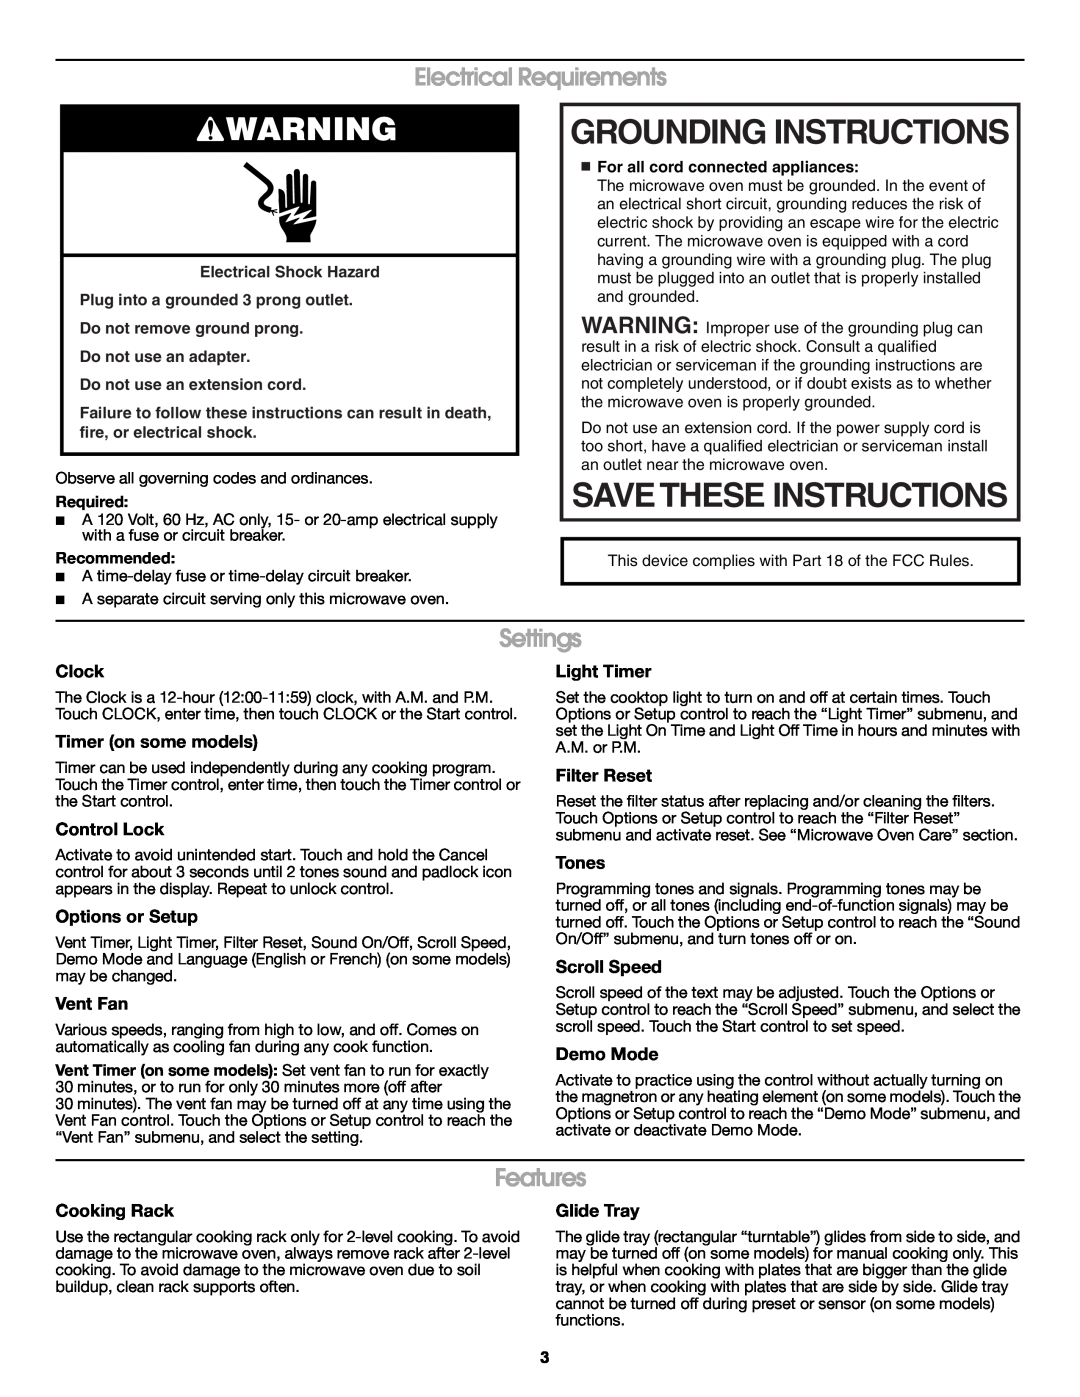 Jenn-Air W10318717A Grounding Instructions, Electrical Requirements, Settings, Features, Clock, Timer on some models 